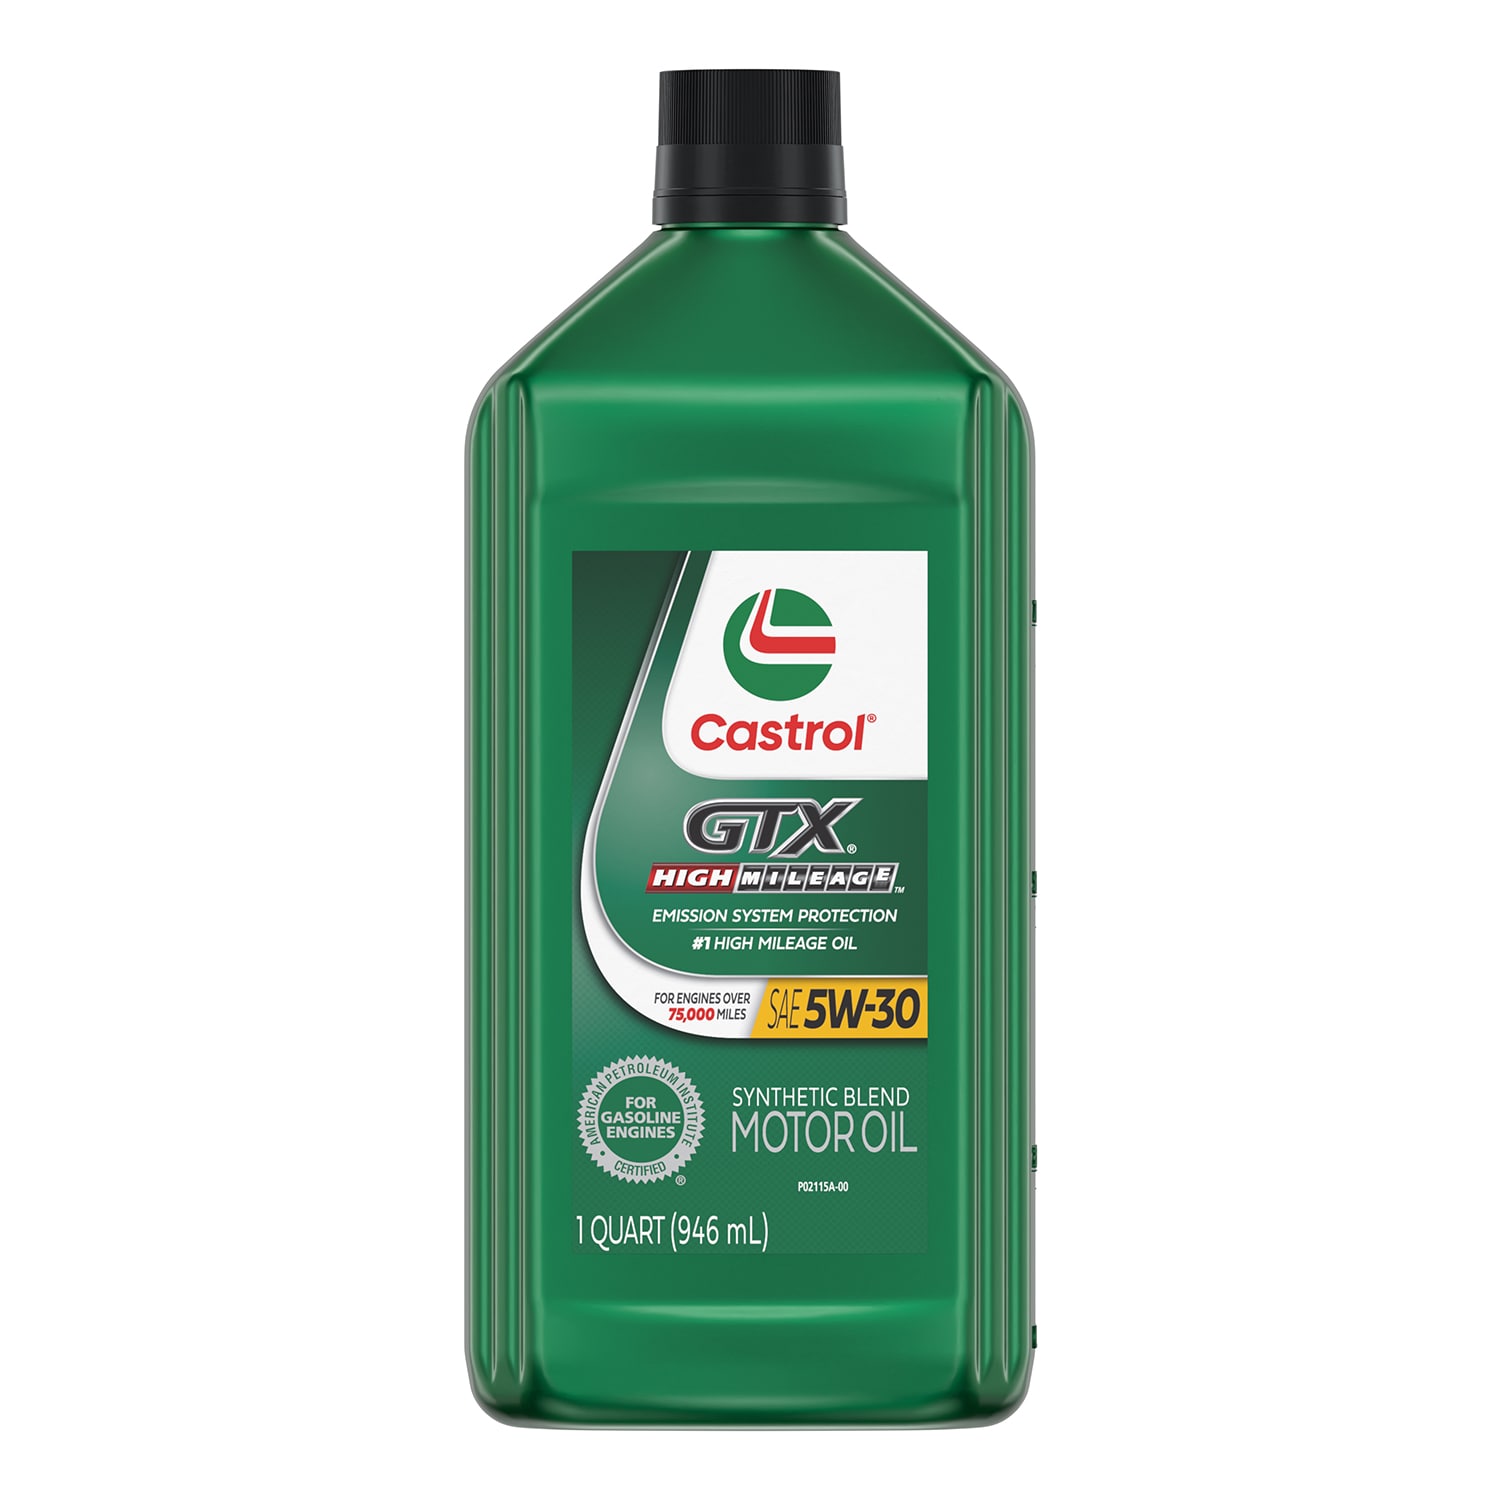 CASTROL 5W-30 High Mileage Full Synthetic Motor Oil - Quart - Improved Fuel  Economy - Prevents Emission System Failure - Reduces Leaks and Engine Wear  in the Motor Oil u0026 Additives department at Lowes.com